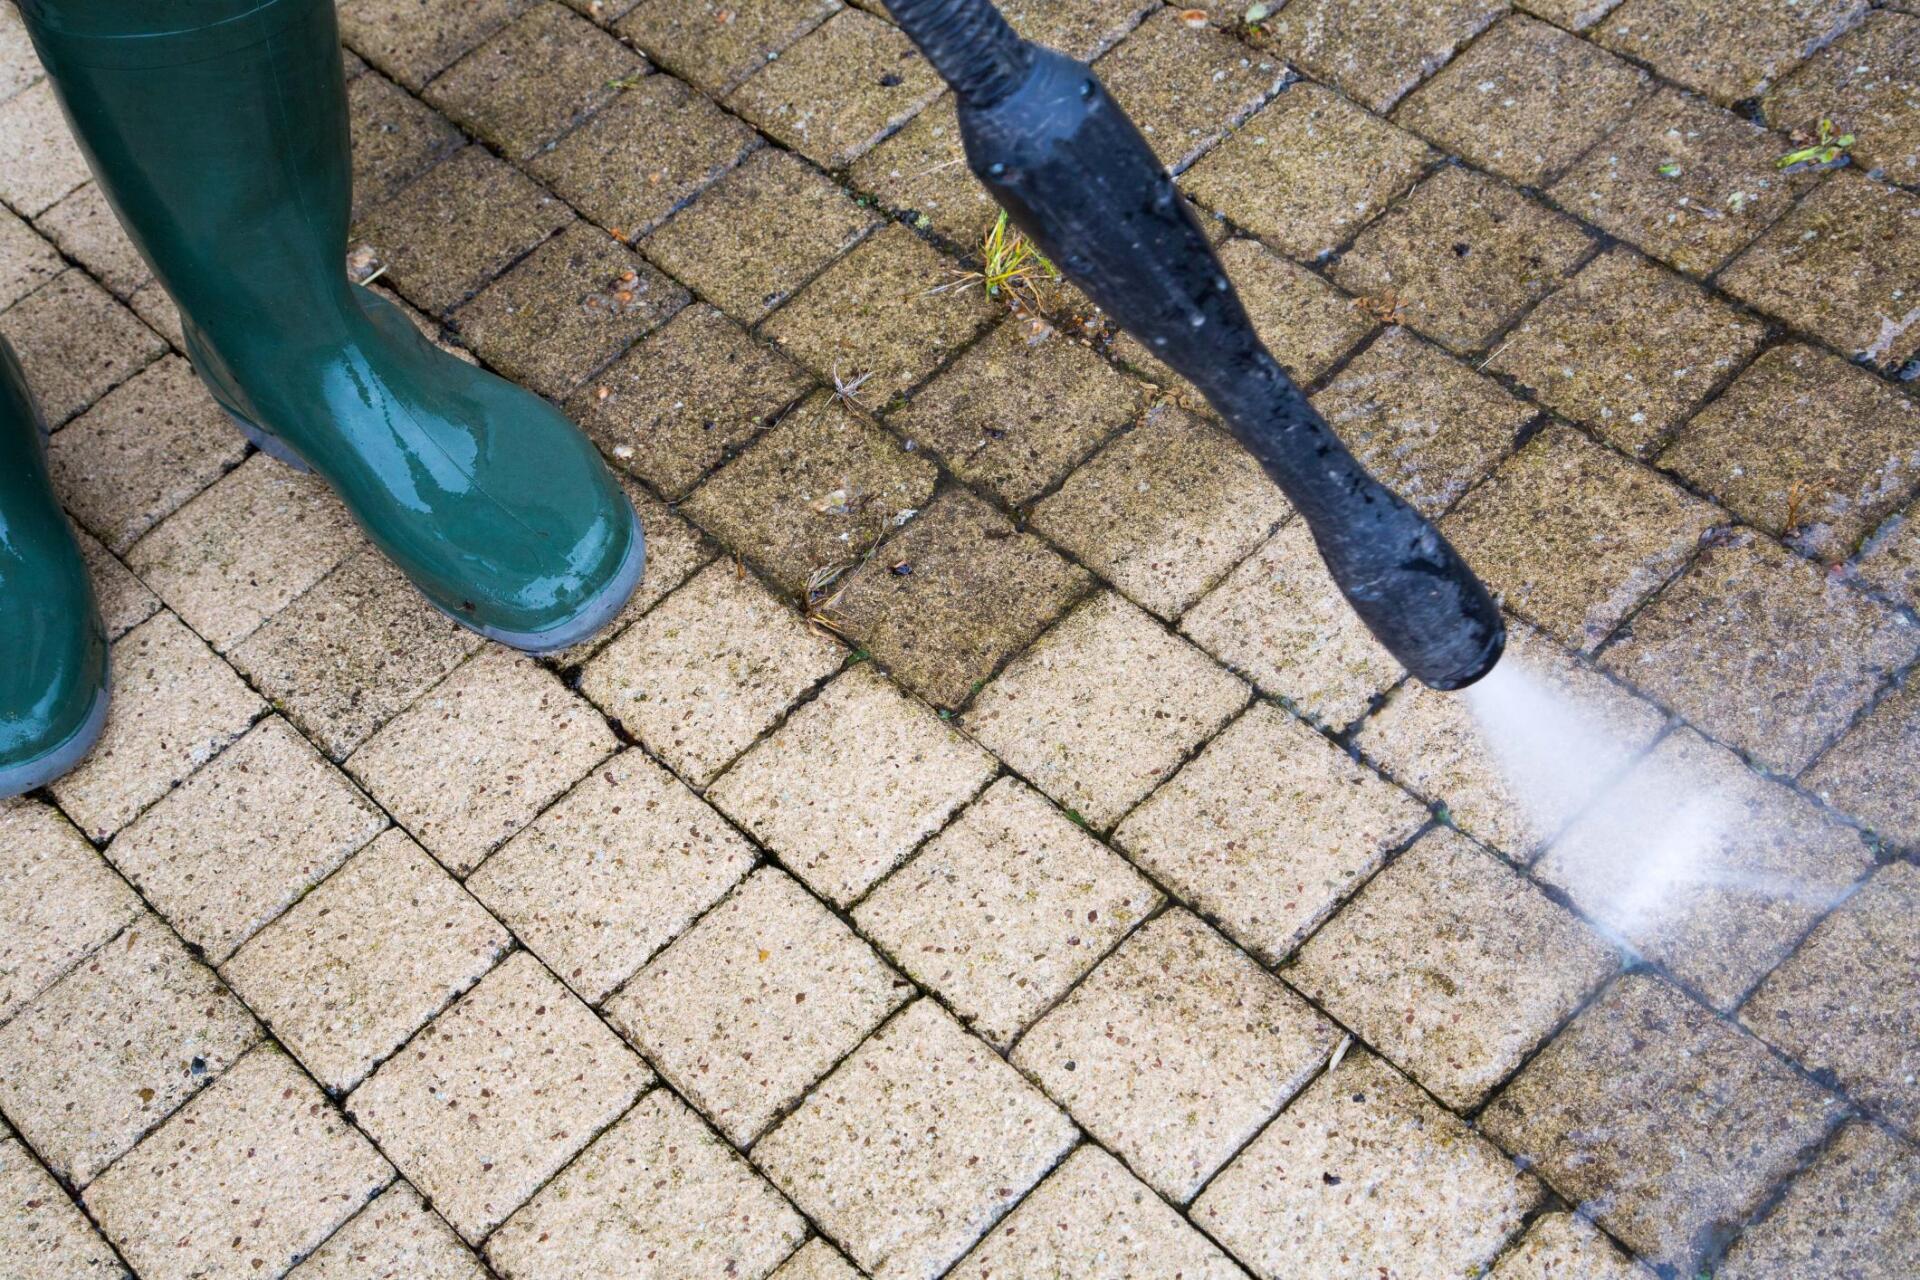 worker in boots using the pressure washer